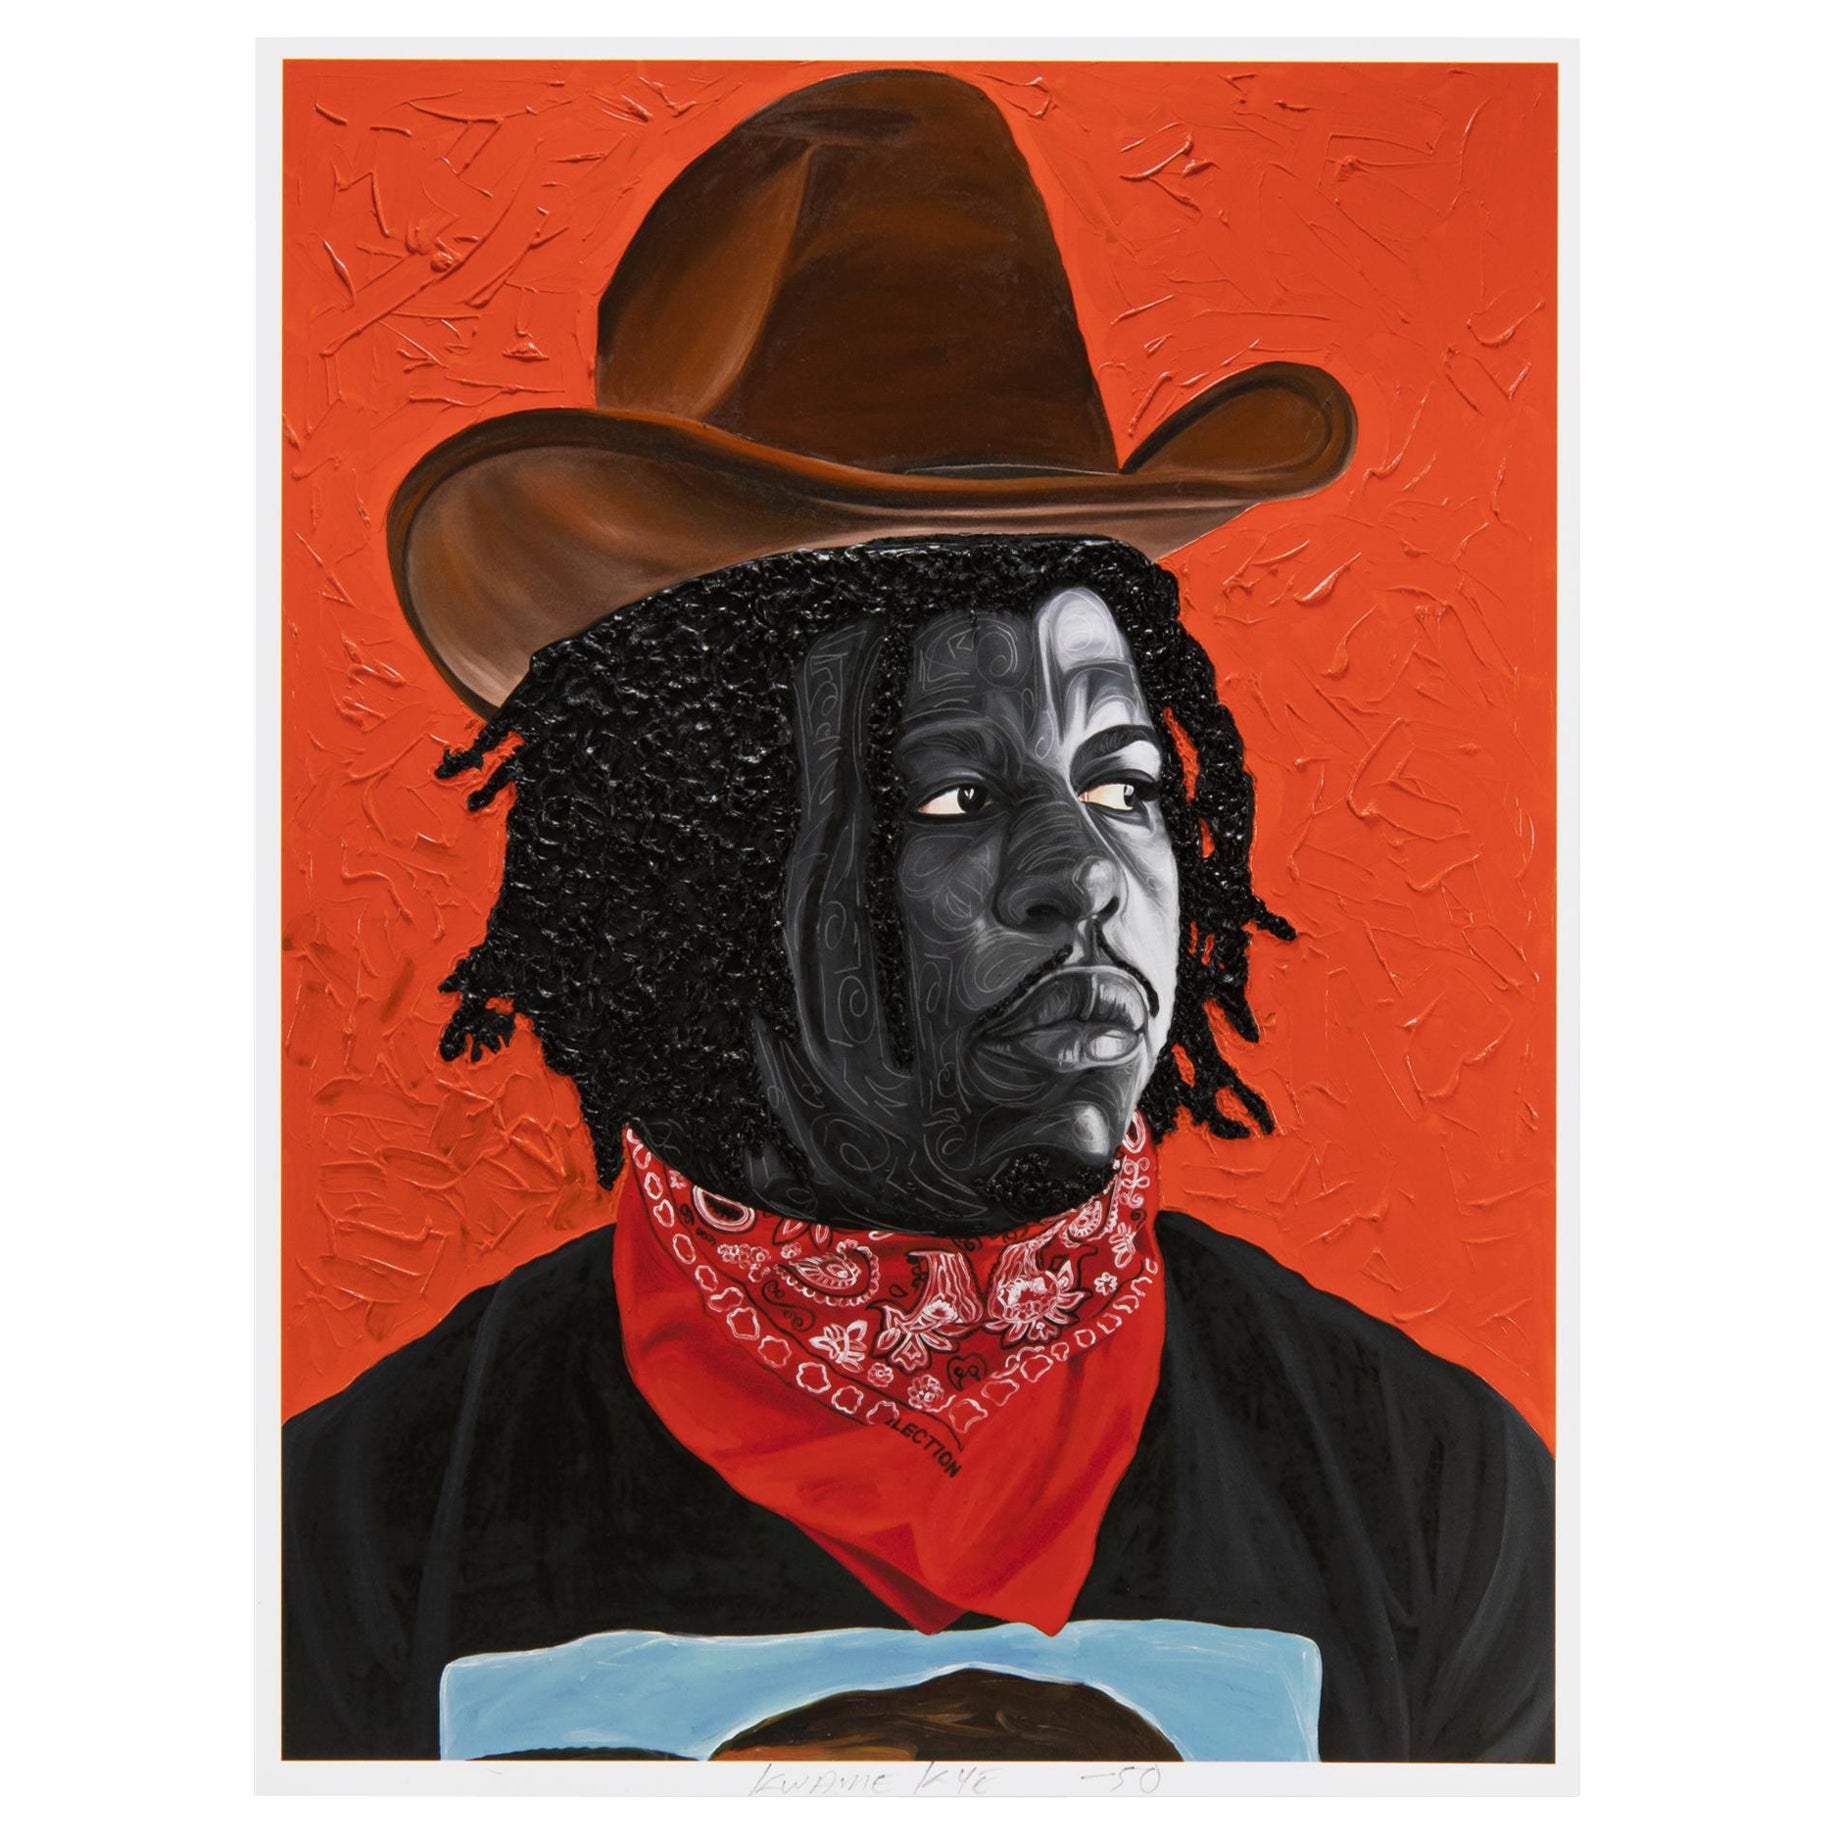 Otis Kwame Kye Quaicoe
Jon Gray (Black Rodeo), 2022
Medium: Archival pigment print and book
Print dimensions: 25 x 20 cm (10 x 8 in)
Book dimensions: 27.5 x 21.5 cm (11 x 8 1/2 in)
Edition of 50: Hand-signed and numbered
Condition: Mint